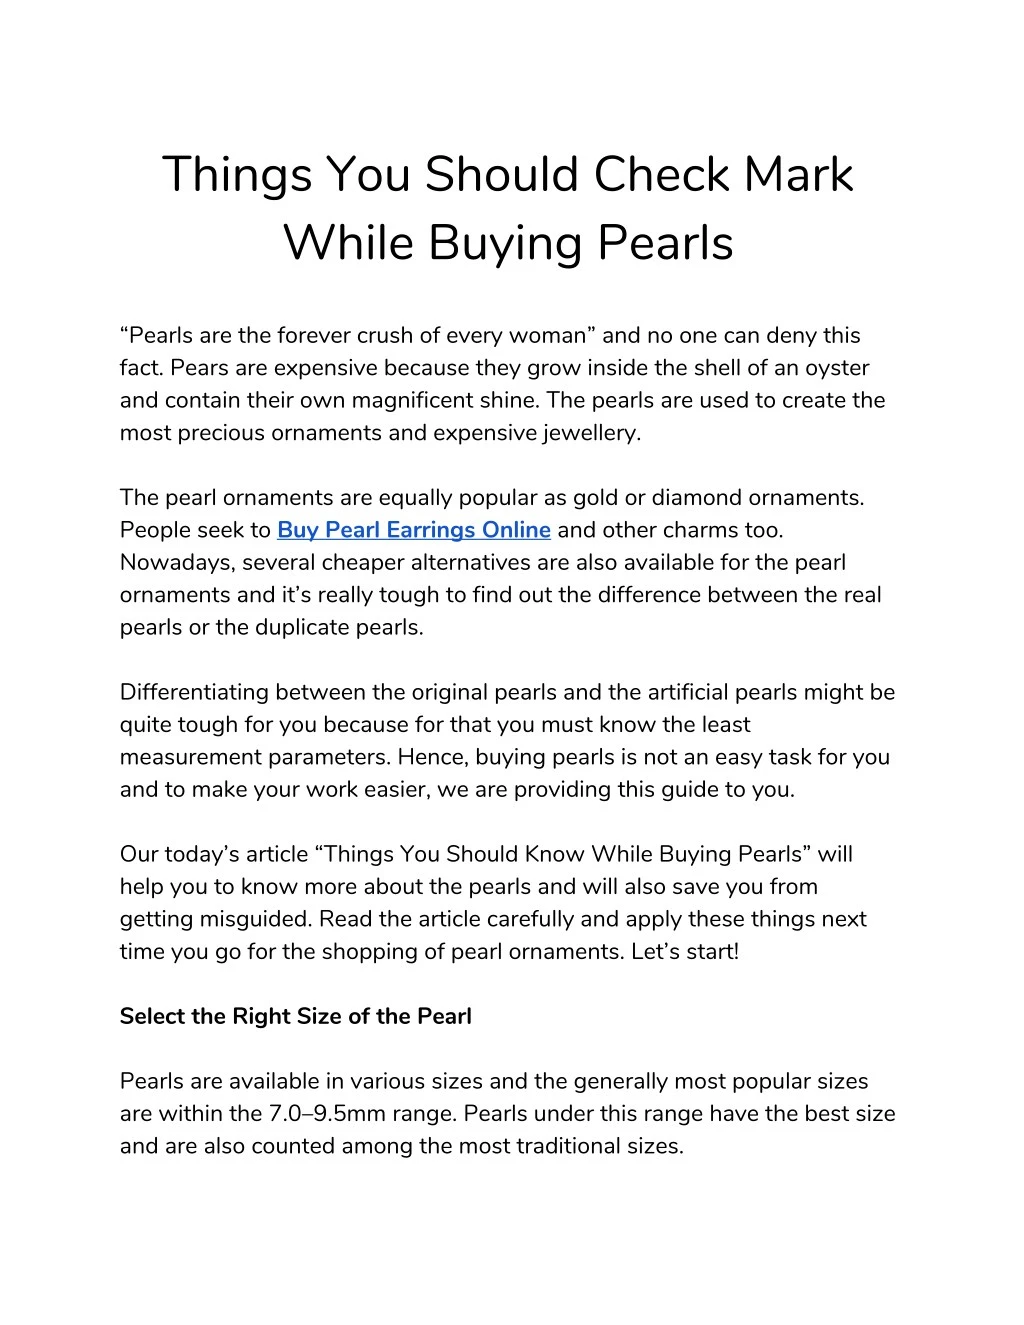 things you should check mark while buying pearls n.